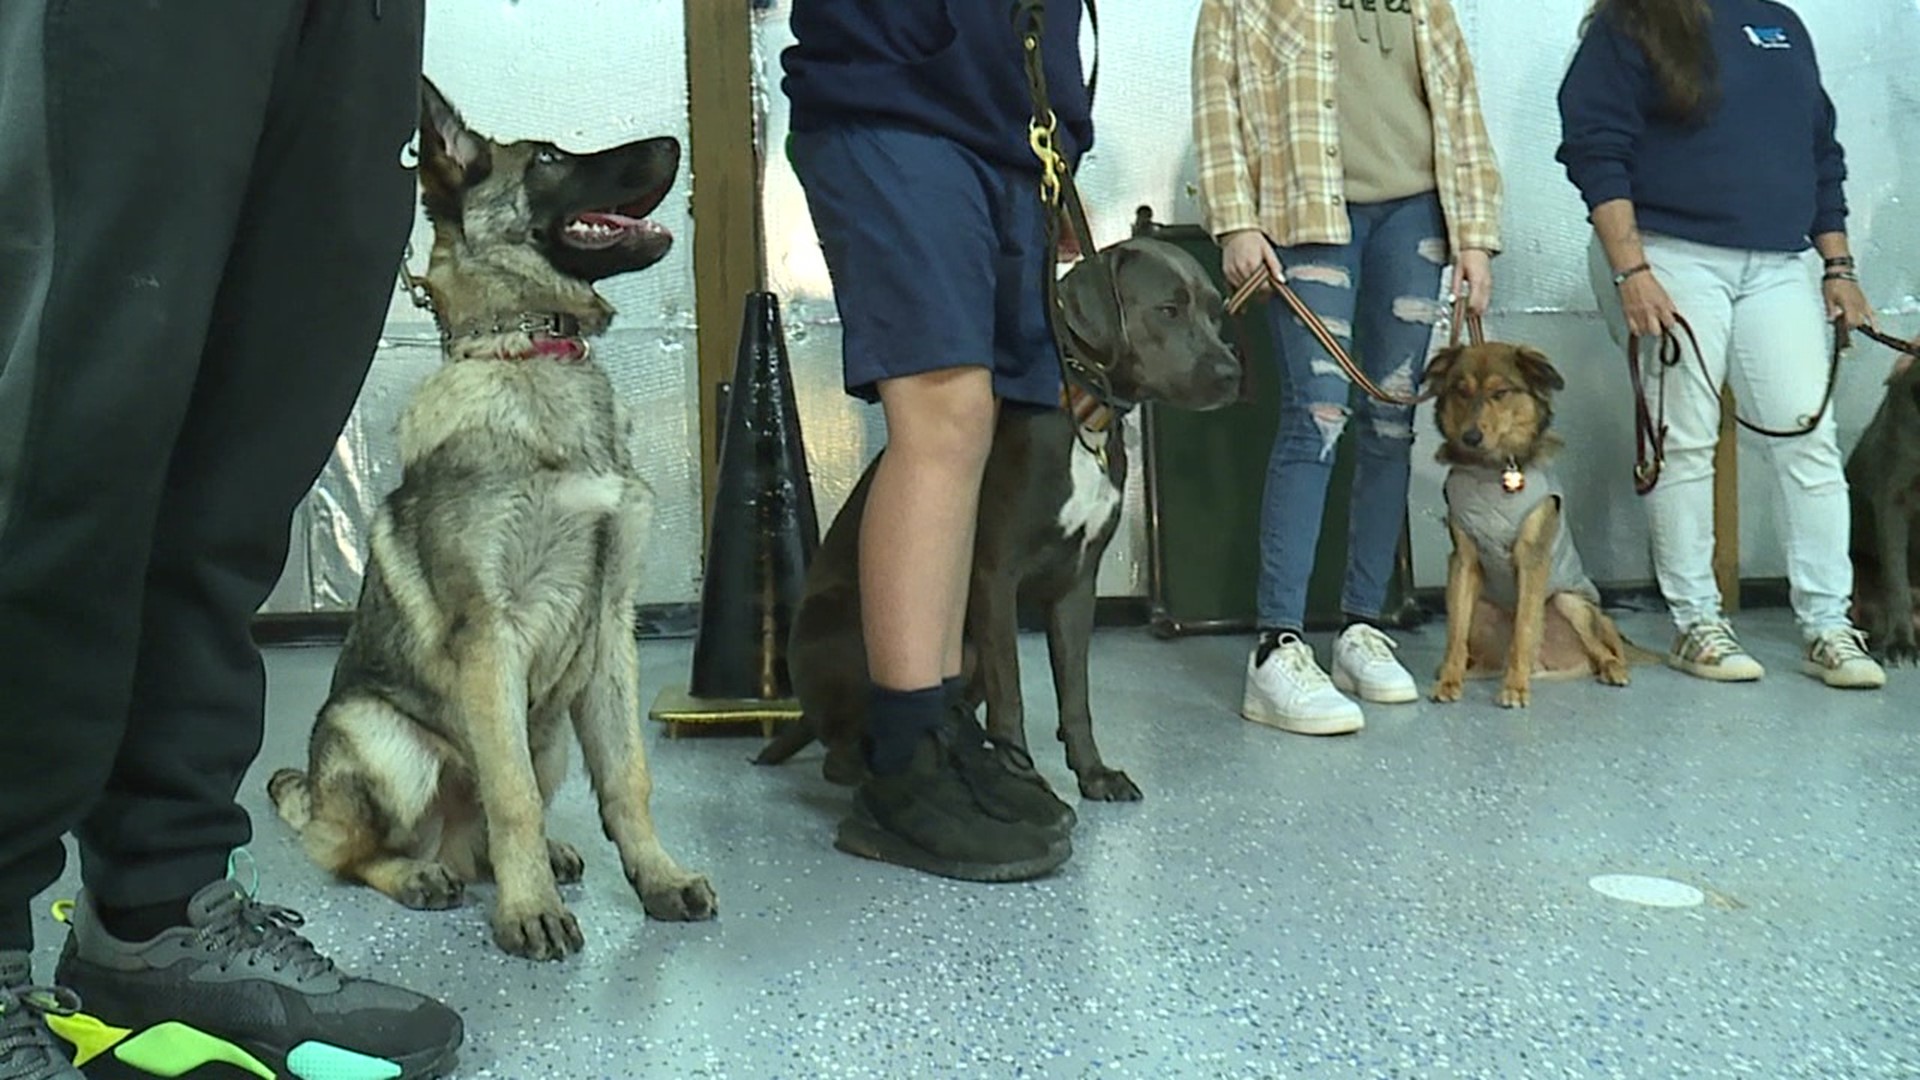 It's a problem that dog trainers say has gotten worse since the start of the pandemic, and it's part of the reason why shelters are overwhelmed.